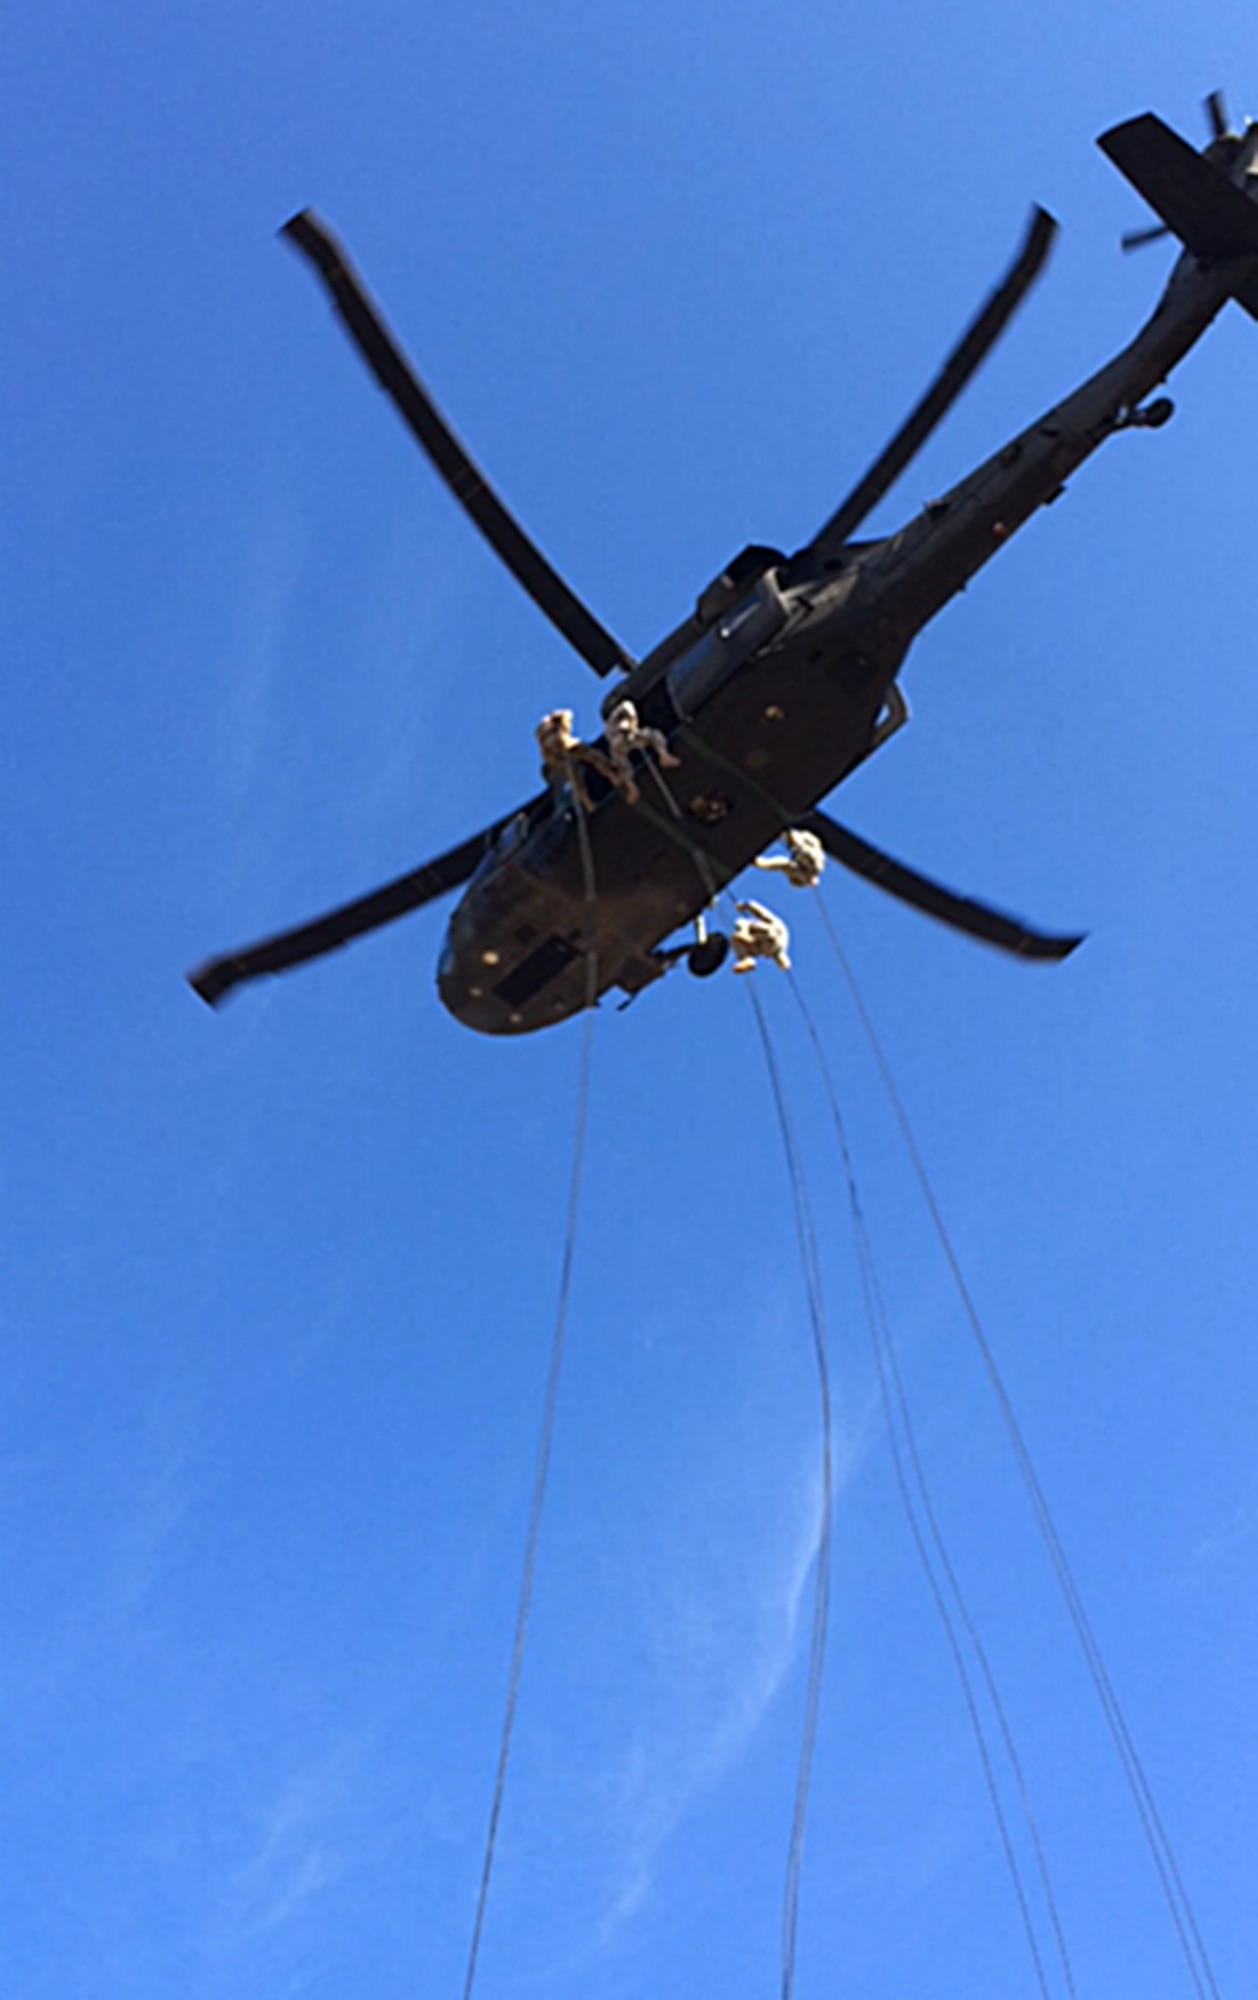 Soldiers and Airmen repel down ropes from an Army HH-60 Black Hawk helicopter during the U.S. Army Air Assault Course at Fort Benning, Ga. Chief Master Sgt. Rob Grimsley, 315th Security Forces Squadron, recently completed the course. (Courtesy Photo)